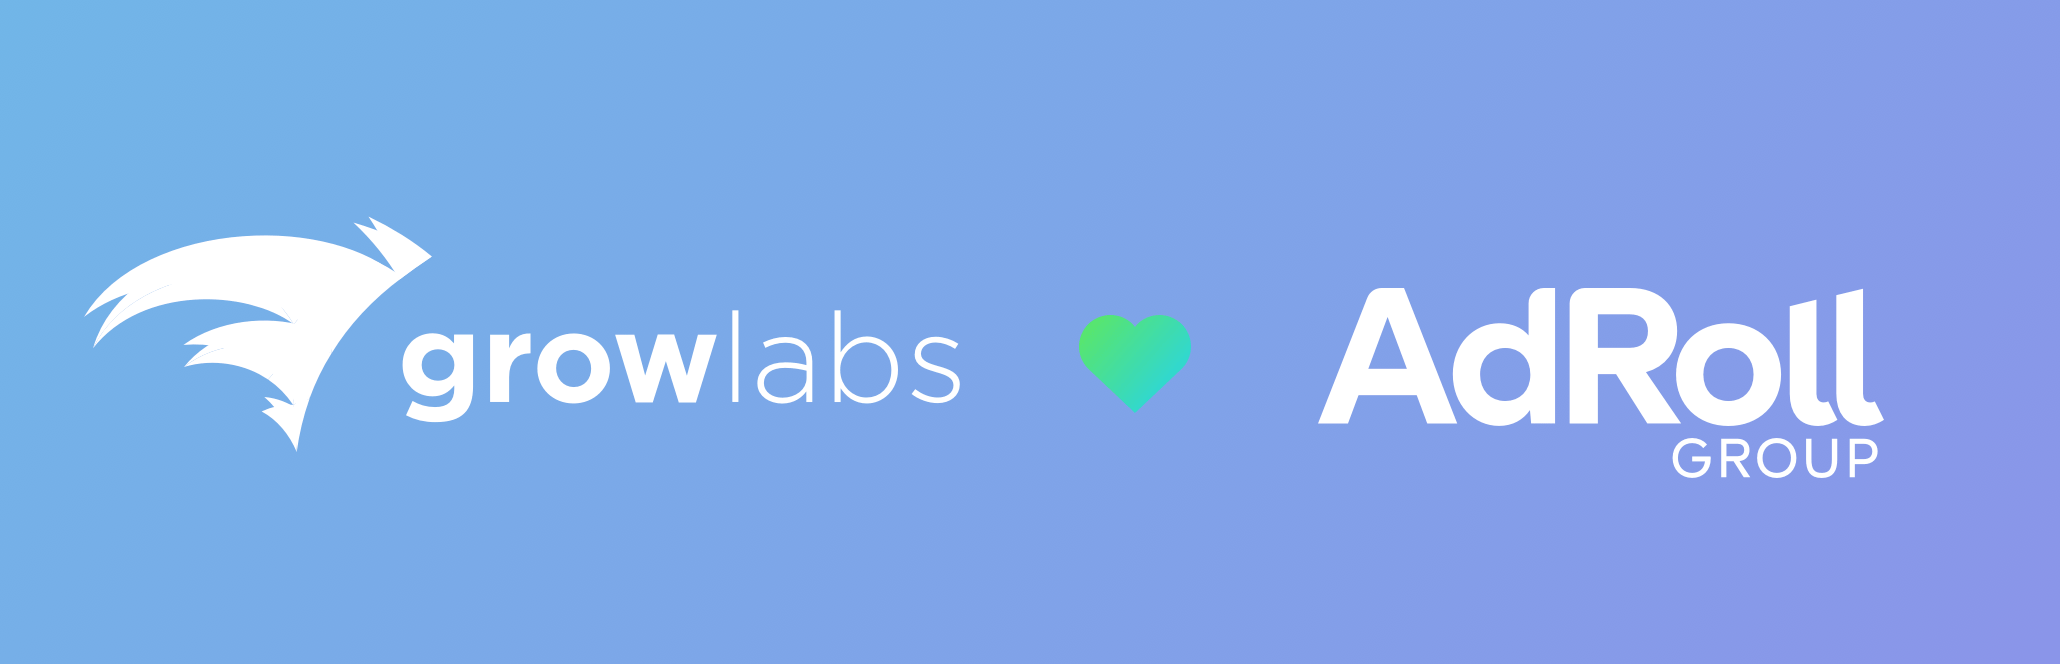 AdRoll Logo - Growlabs is now part of AdRoll Group